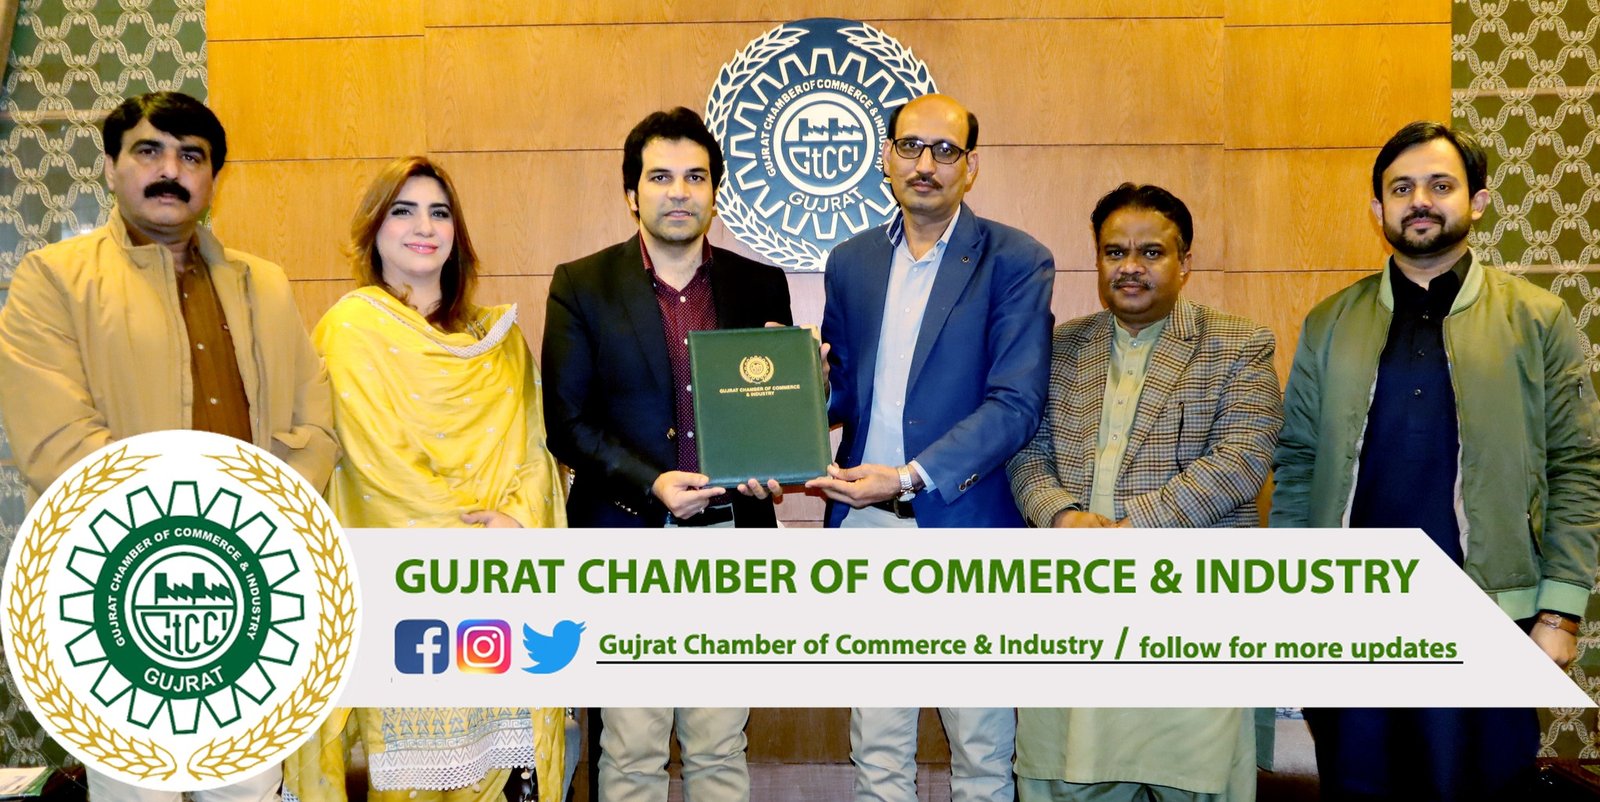 Gujrat Chamber of Commerce & Industry #Signed an #MOU with #HudaConsultantsPvtLtd. Mr. Sikander Ishfaq Razi #President #GtCCI and Mr. Ishtiaq Ahmed #Director Huda Consultants #signed this #MOU, Mr. Muhammad Artza Rehm #Director Huda #Consultants and Mr. M. Usman Muzaffar #SecretaryGeneral #GtCCI also signed this MOU as the #witness.